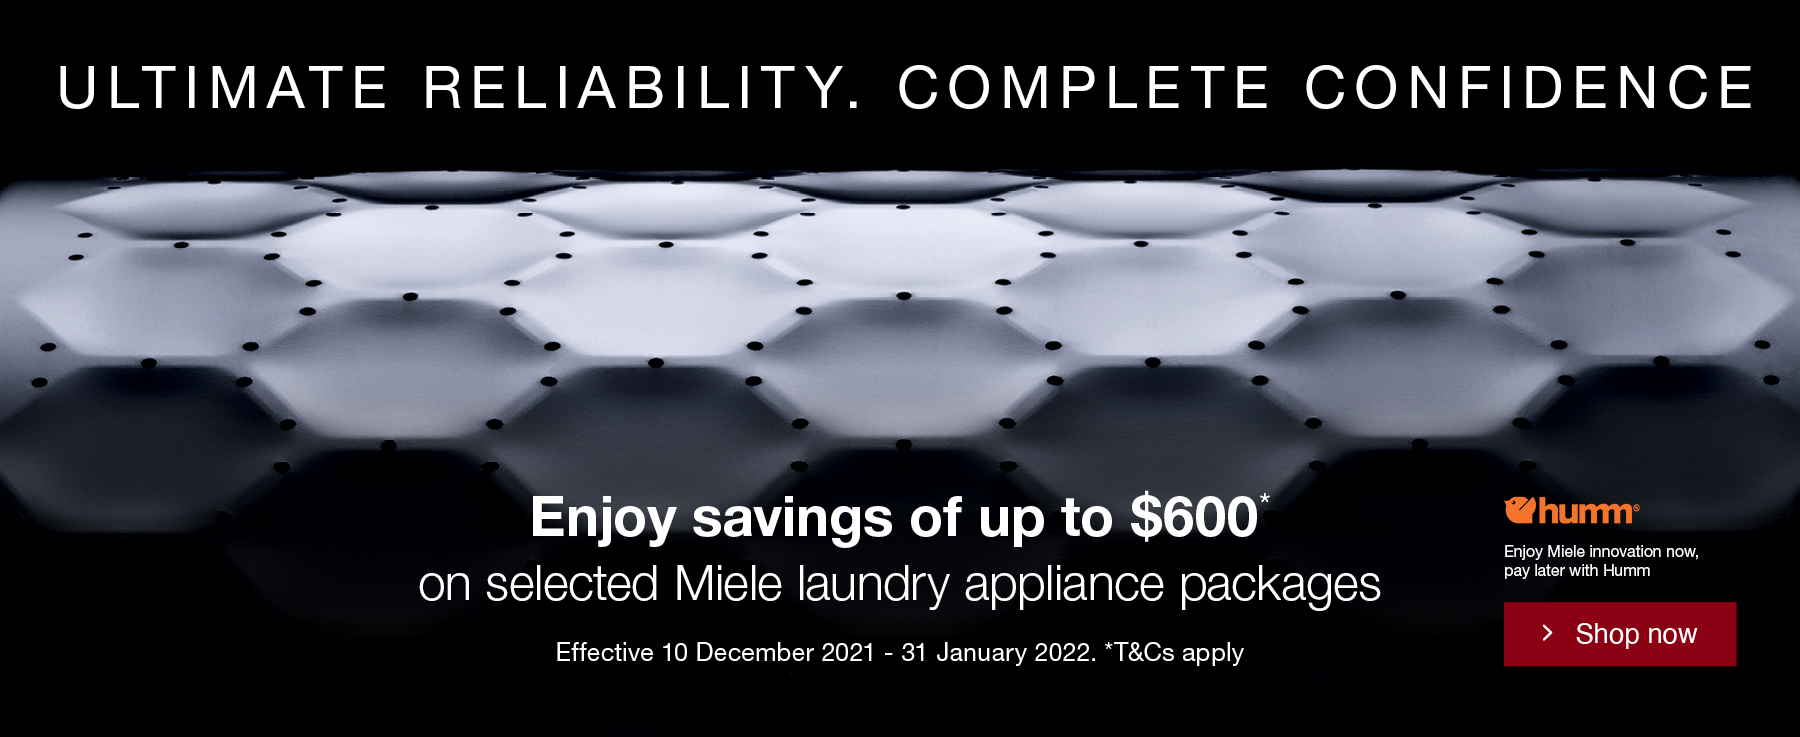 Miele up to $600 on selected Miele laundry appliances package